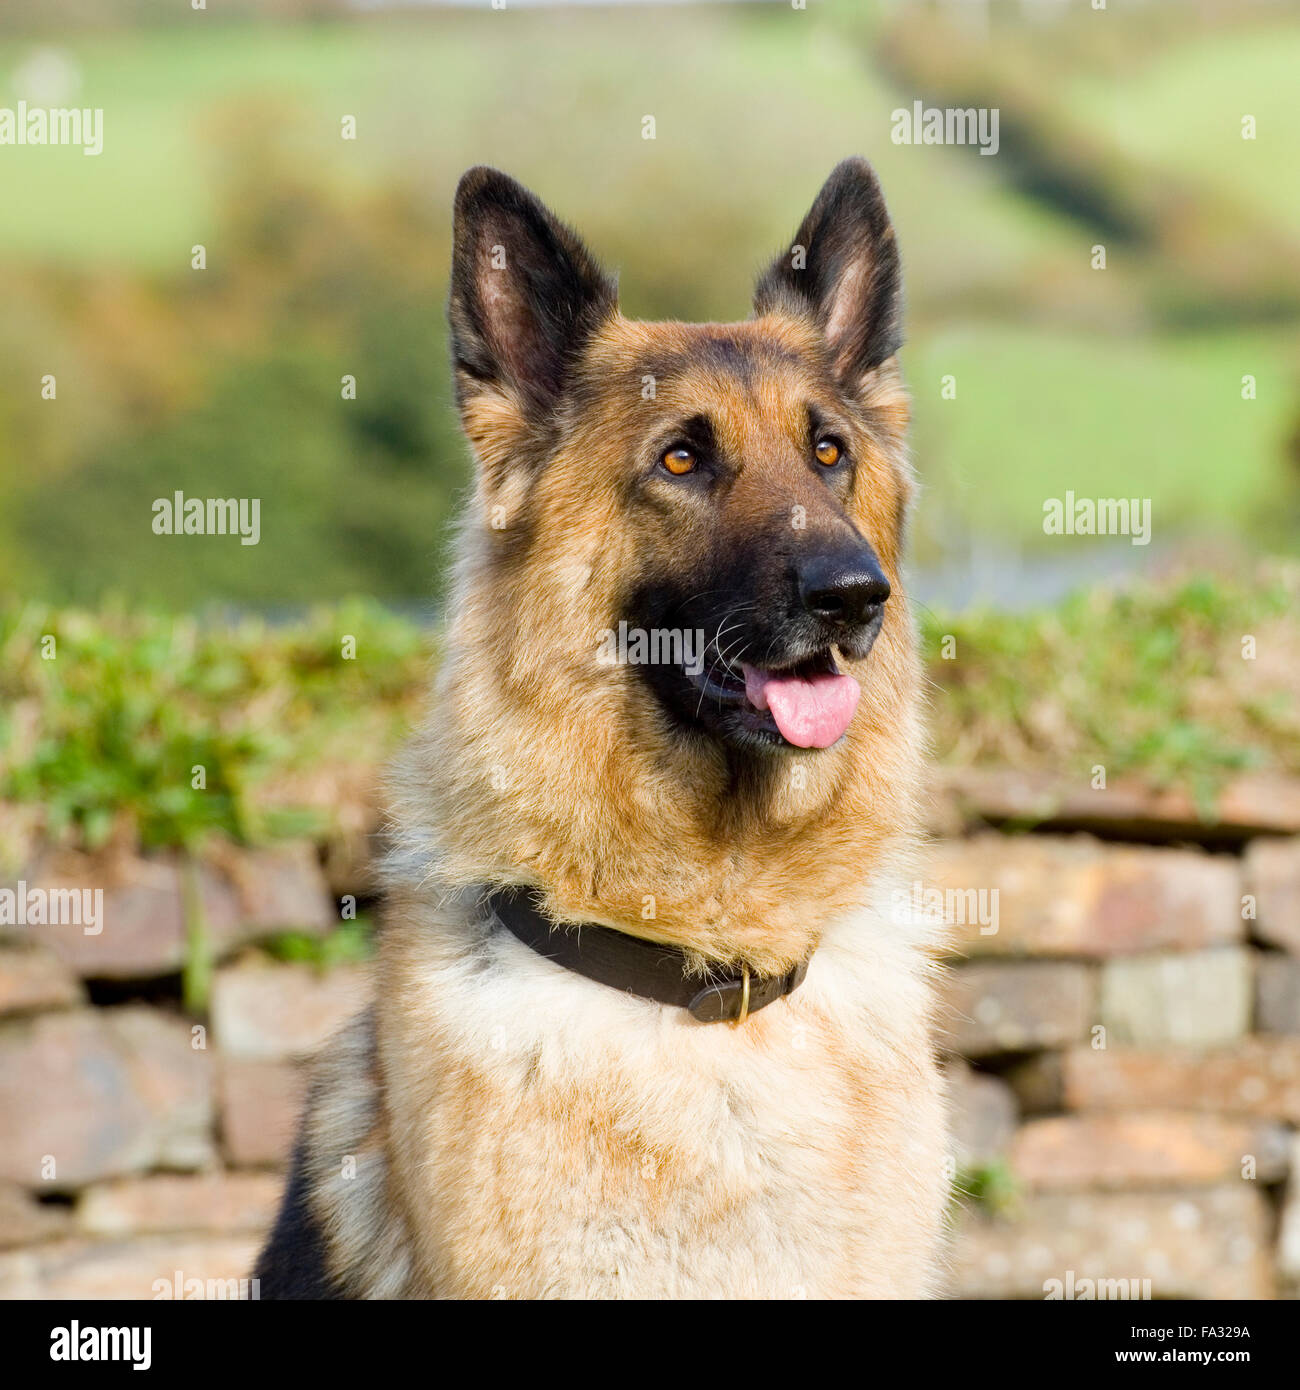 51 HQ Images German Shepherd Puppies Scarborough Maine / Select Shepherds Expect No Less Accept No Less